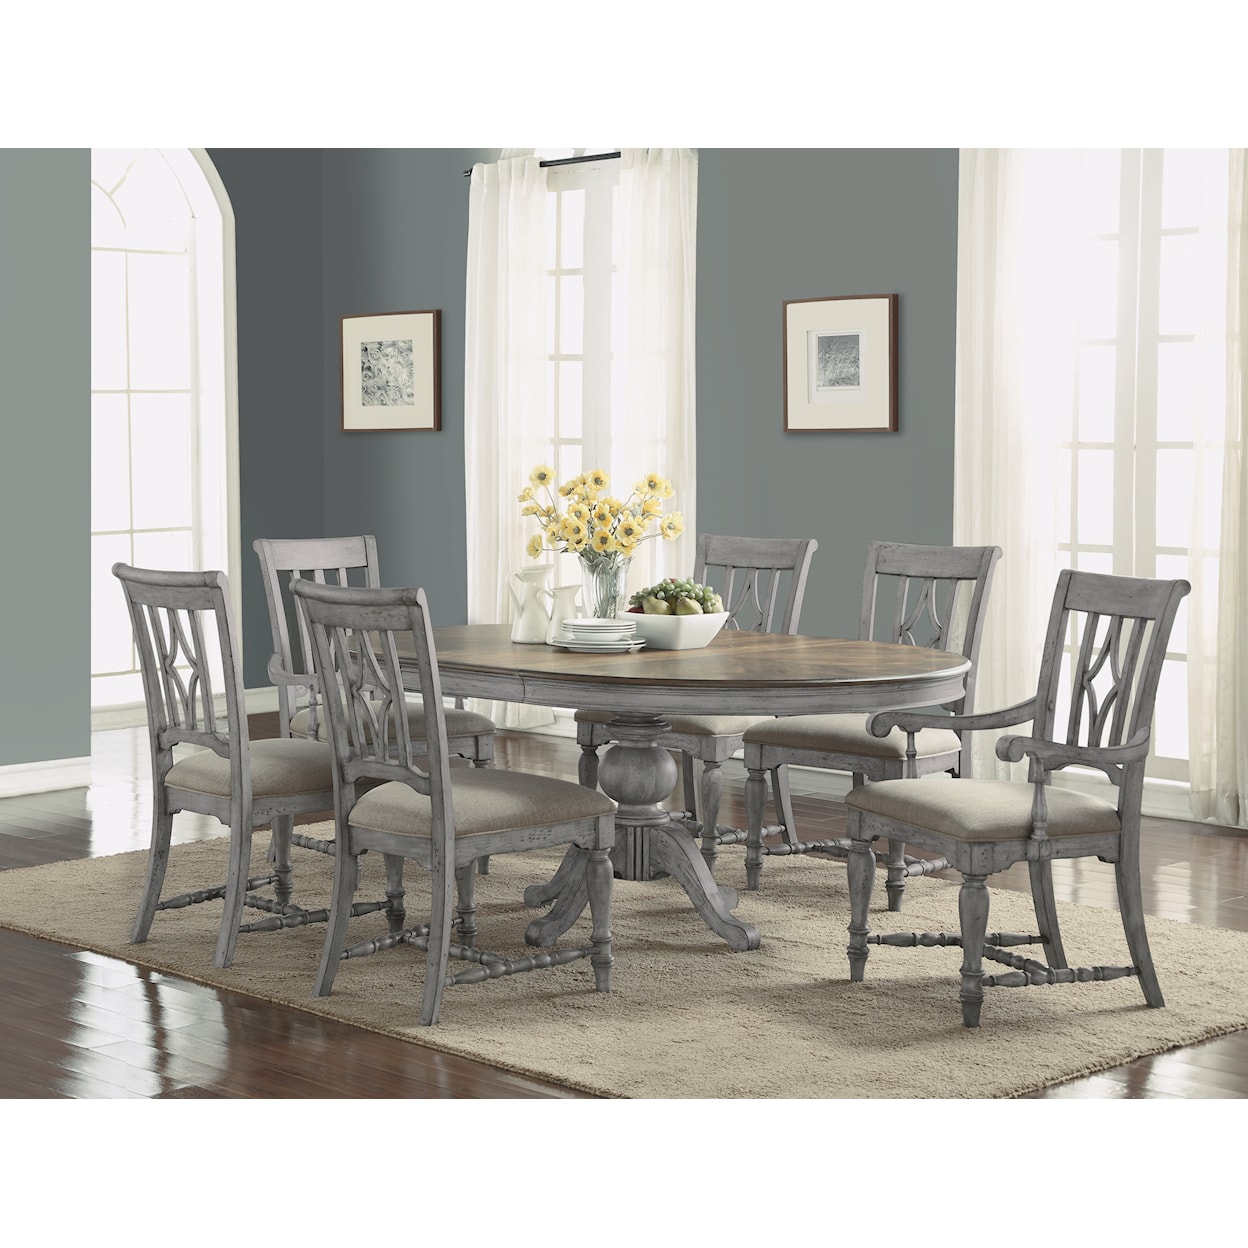 Wynwood, A Flexsteel Company Plymouth Table and Chair Set